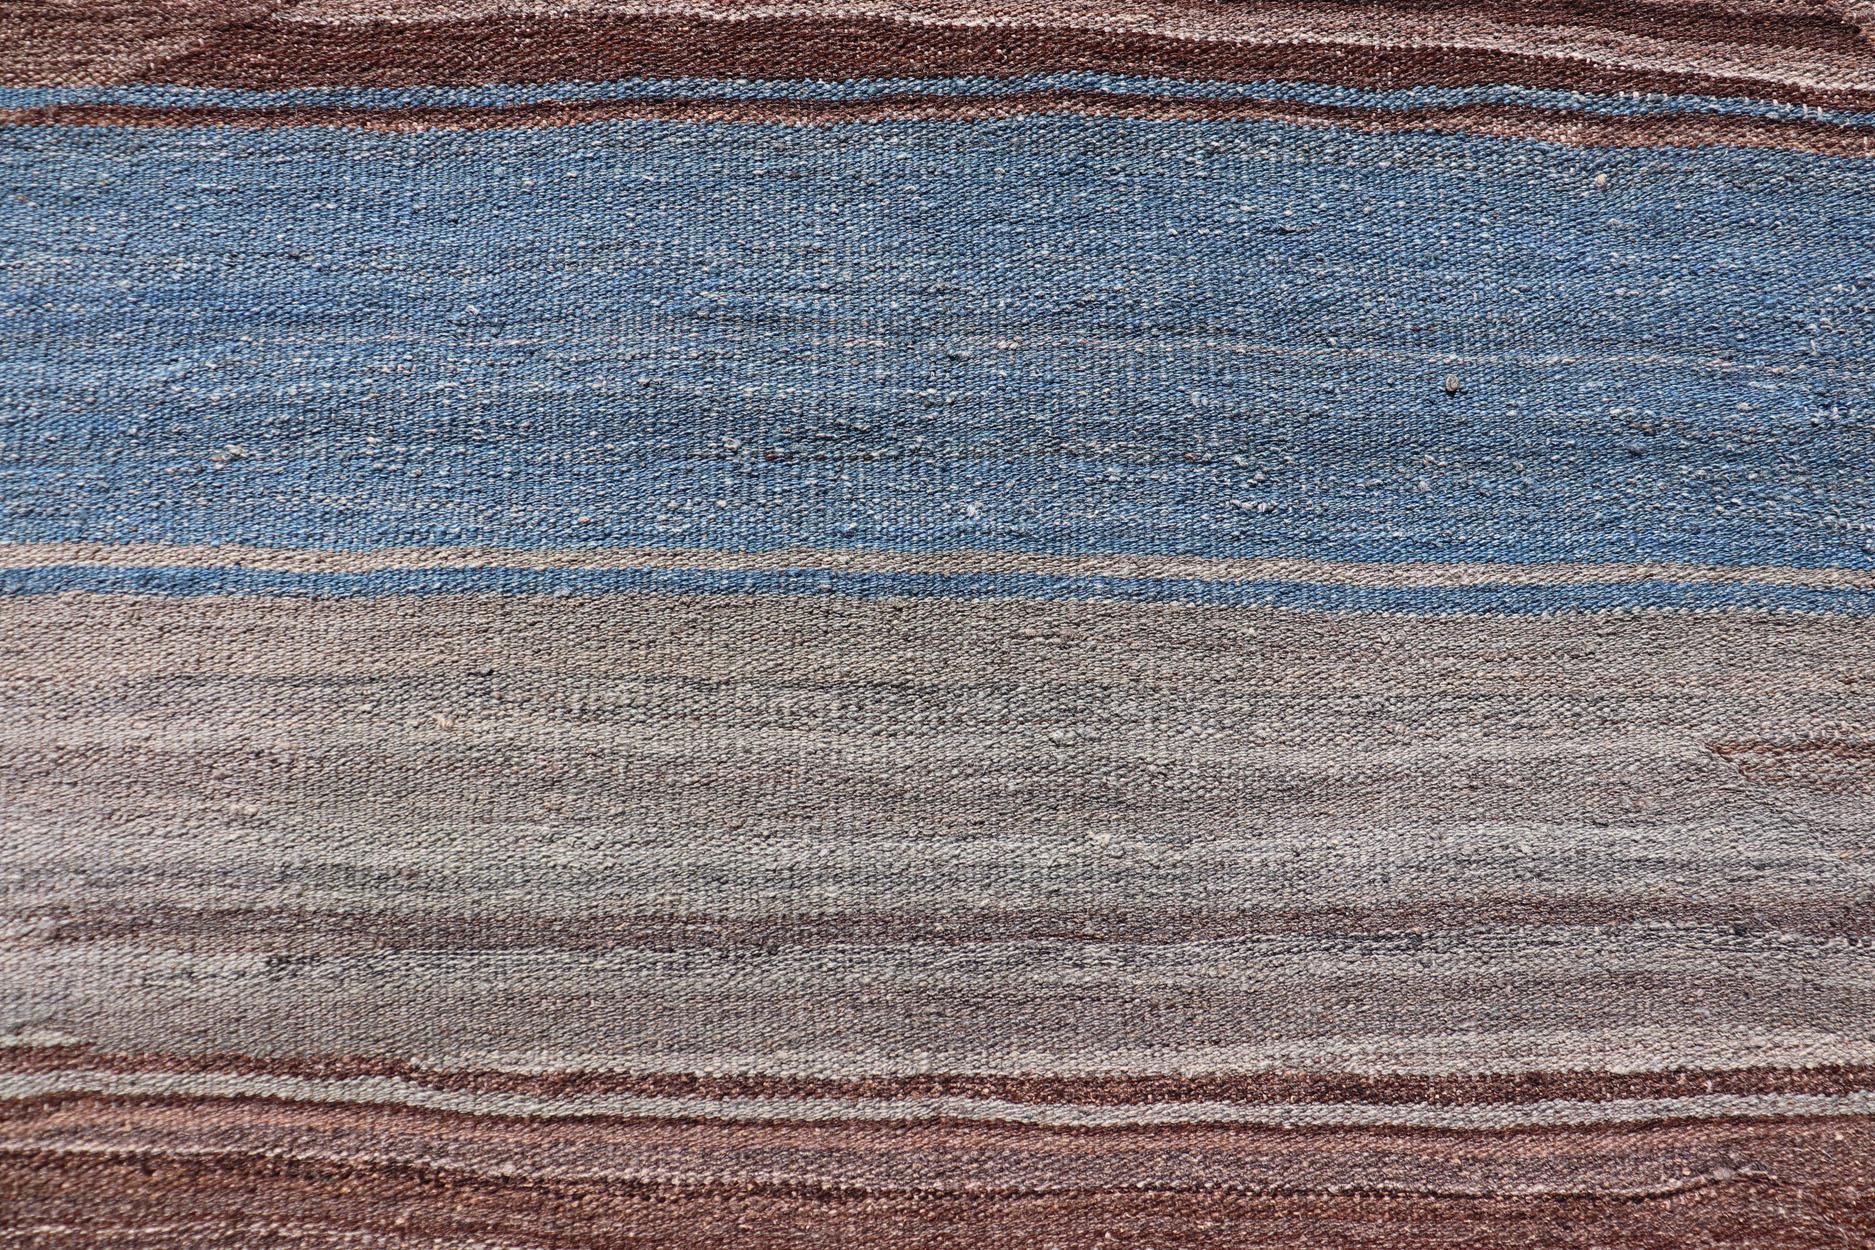 Modern Kilim Rug with Stripes in Shades of Blue, Brown, Light Gray and Cream For Sale 1